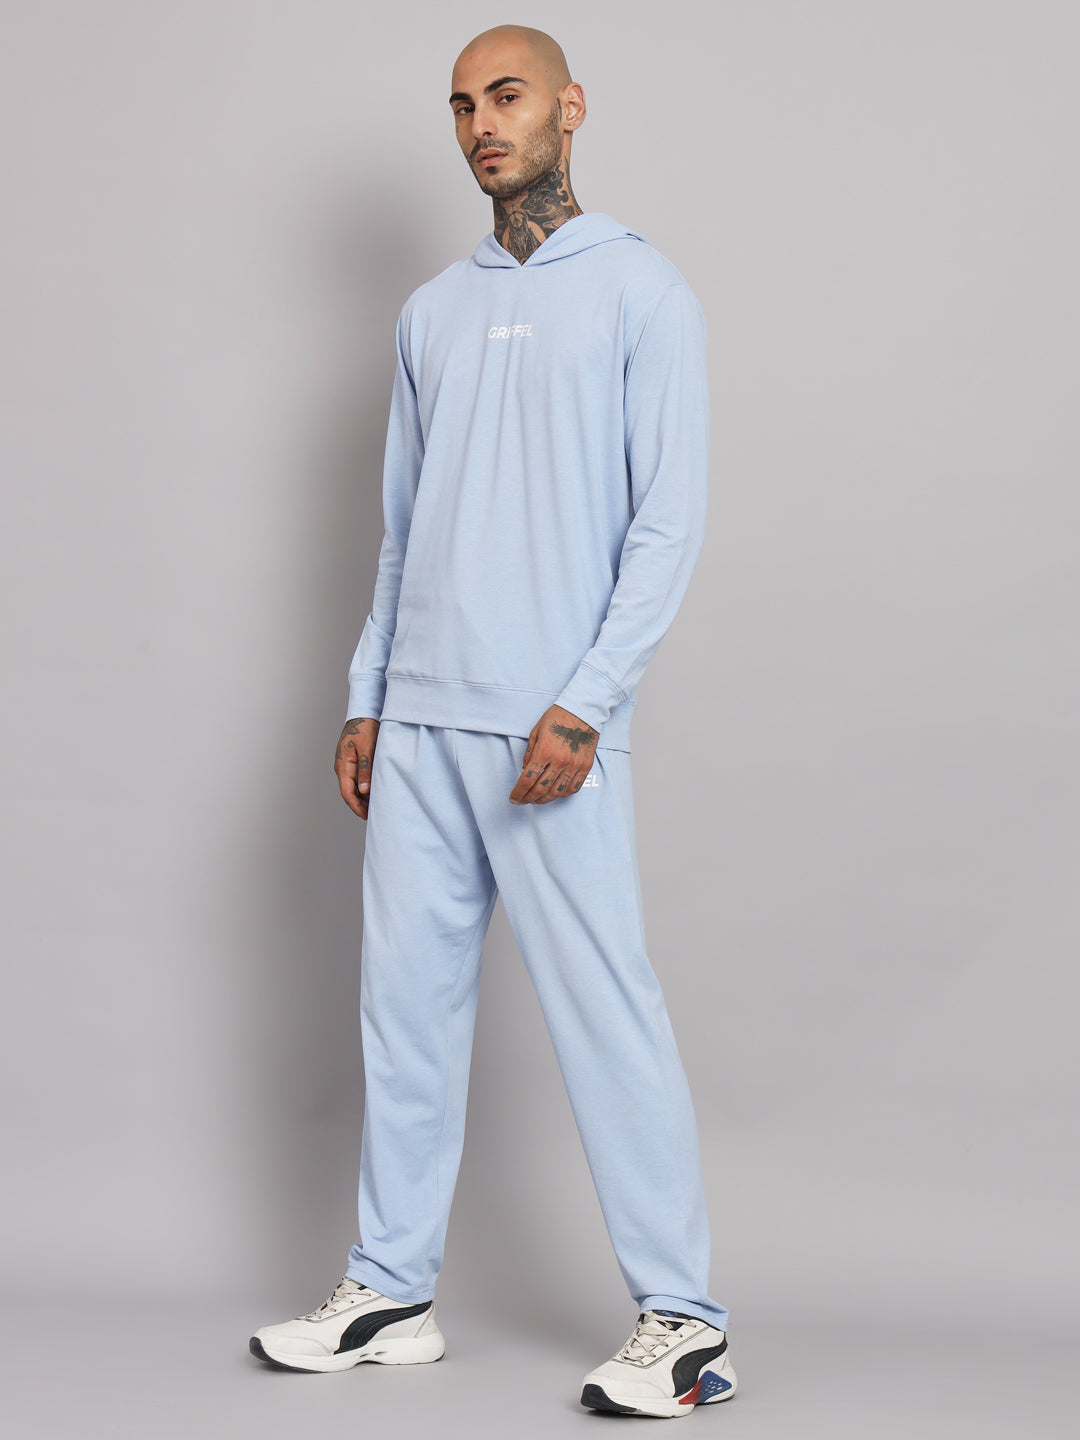 Griffel Men's Pre Winter Front Logo Solid Cotton Basic Hoodie and Joggers Full set Sky Blue Tracksuit